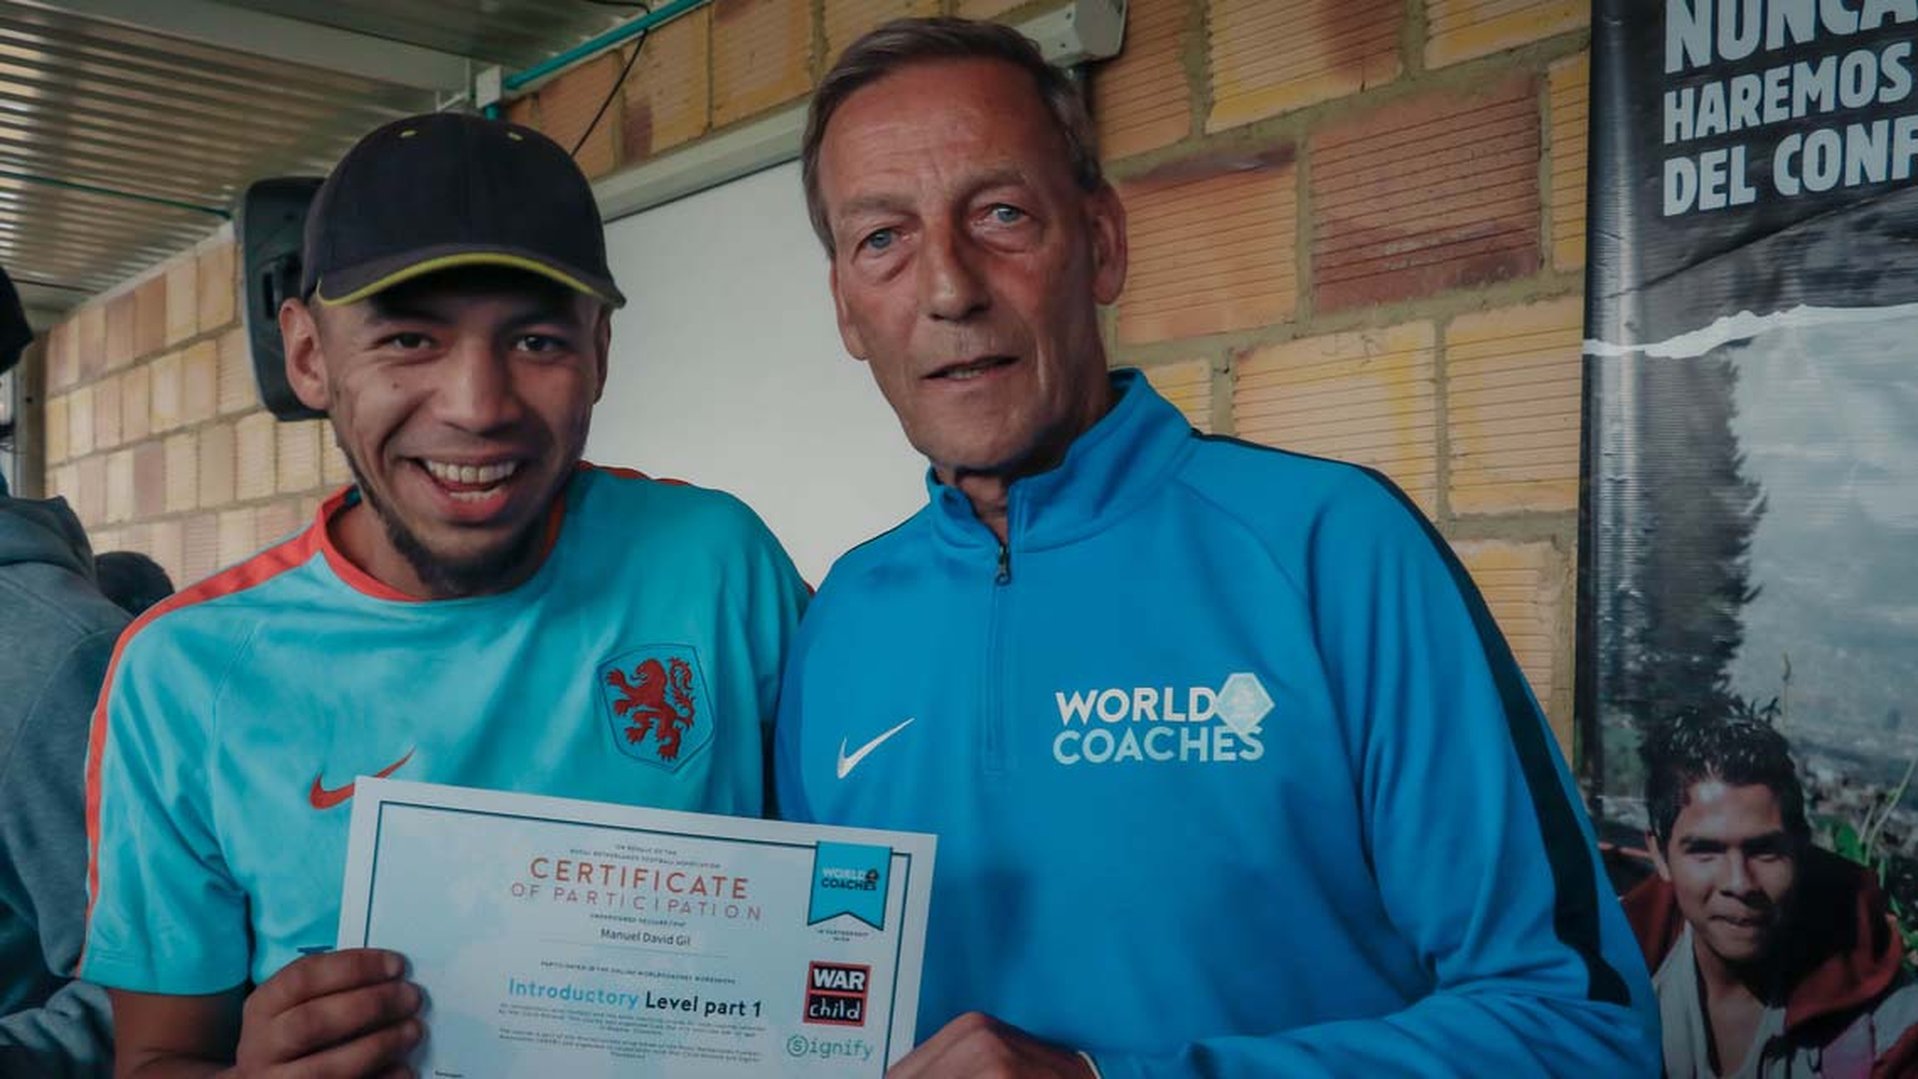 War Child Colombia Play it For Life participant Manuel with diploma, standing alongside Johan Neeskens